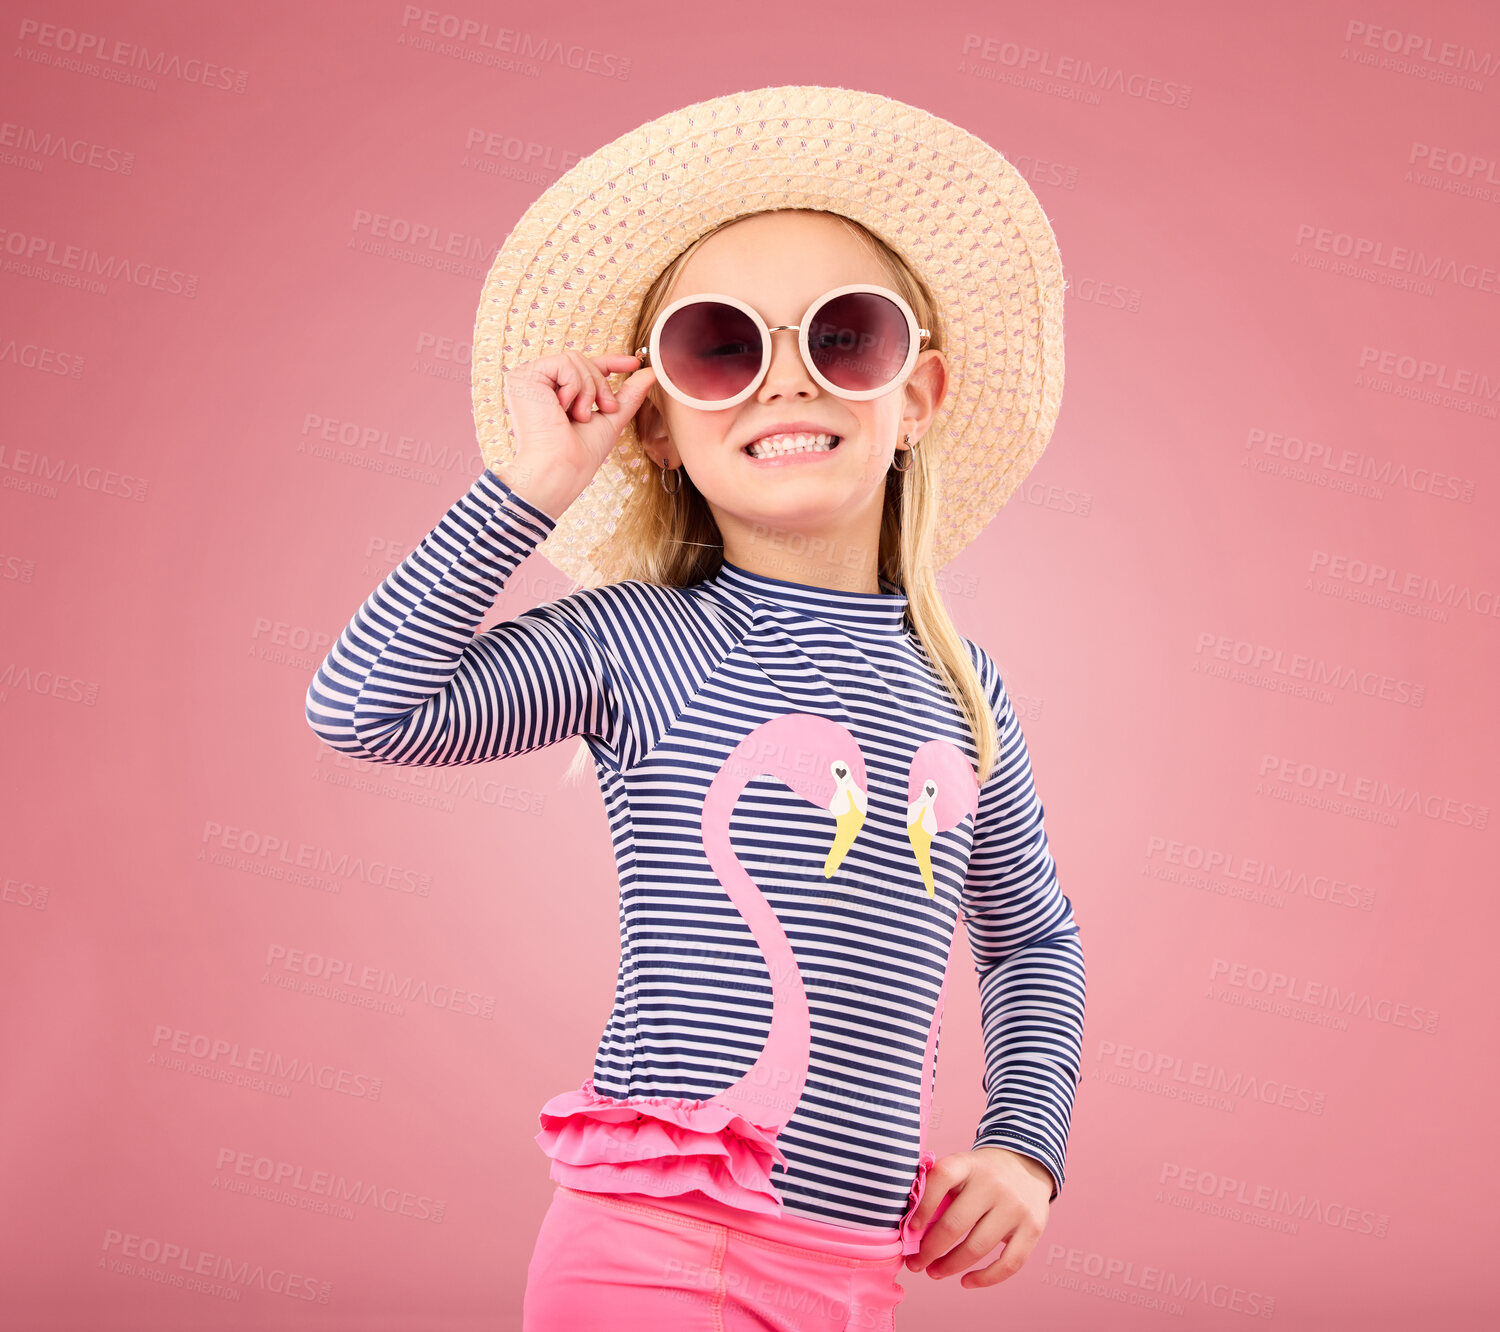 Buy stock photo Vacation, portrait of happy child with sunglasses and hat in studio with fun clothes isolated on pink background. Summer, holiday and fashion, girl in Australia excited for travel with smile on face.